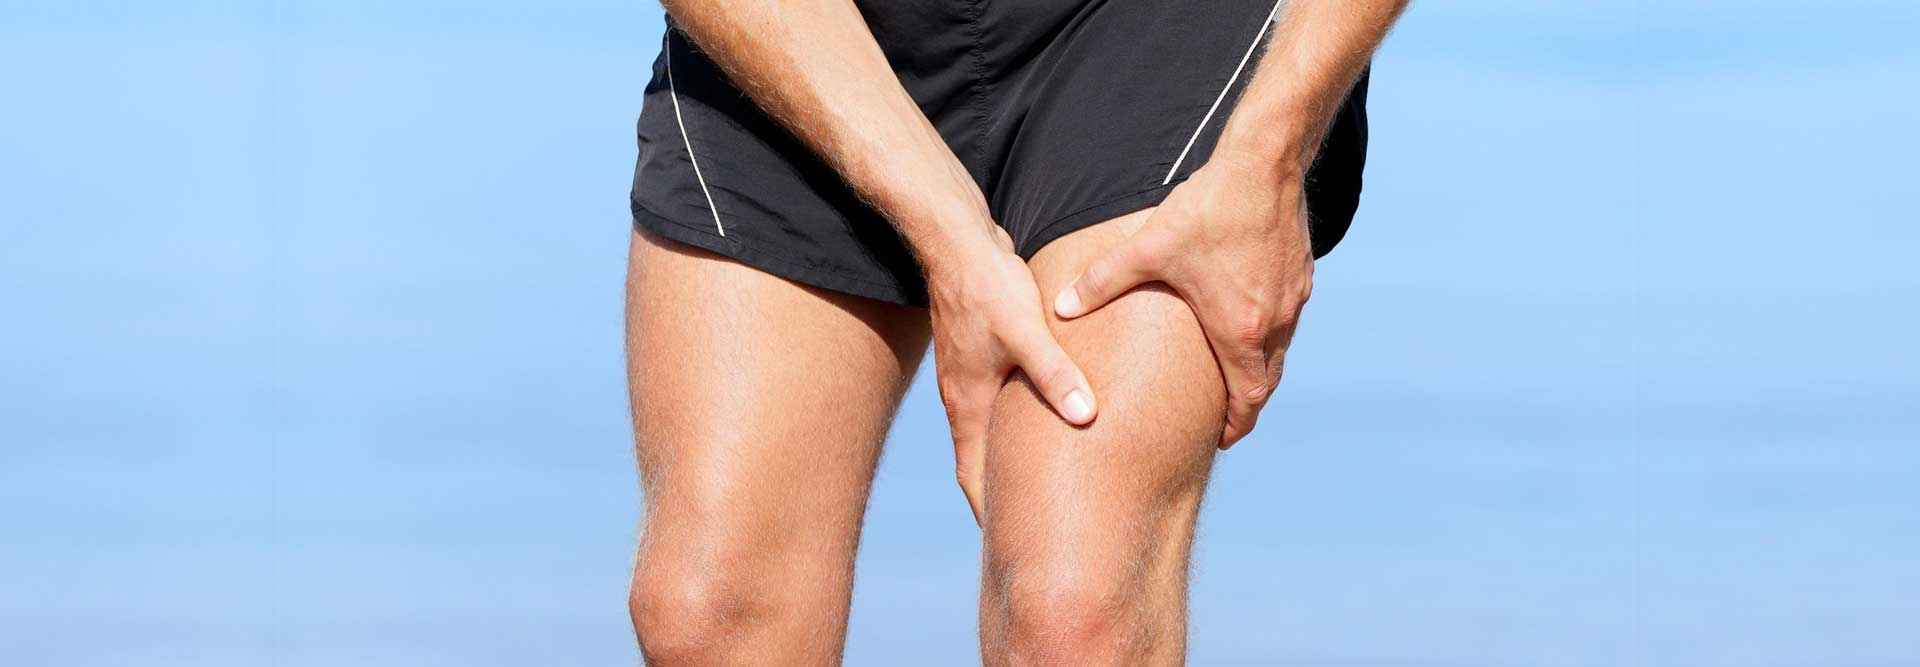 Thigh Muscle Strain – Pulled Muscle - Self-Healing Course